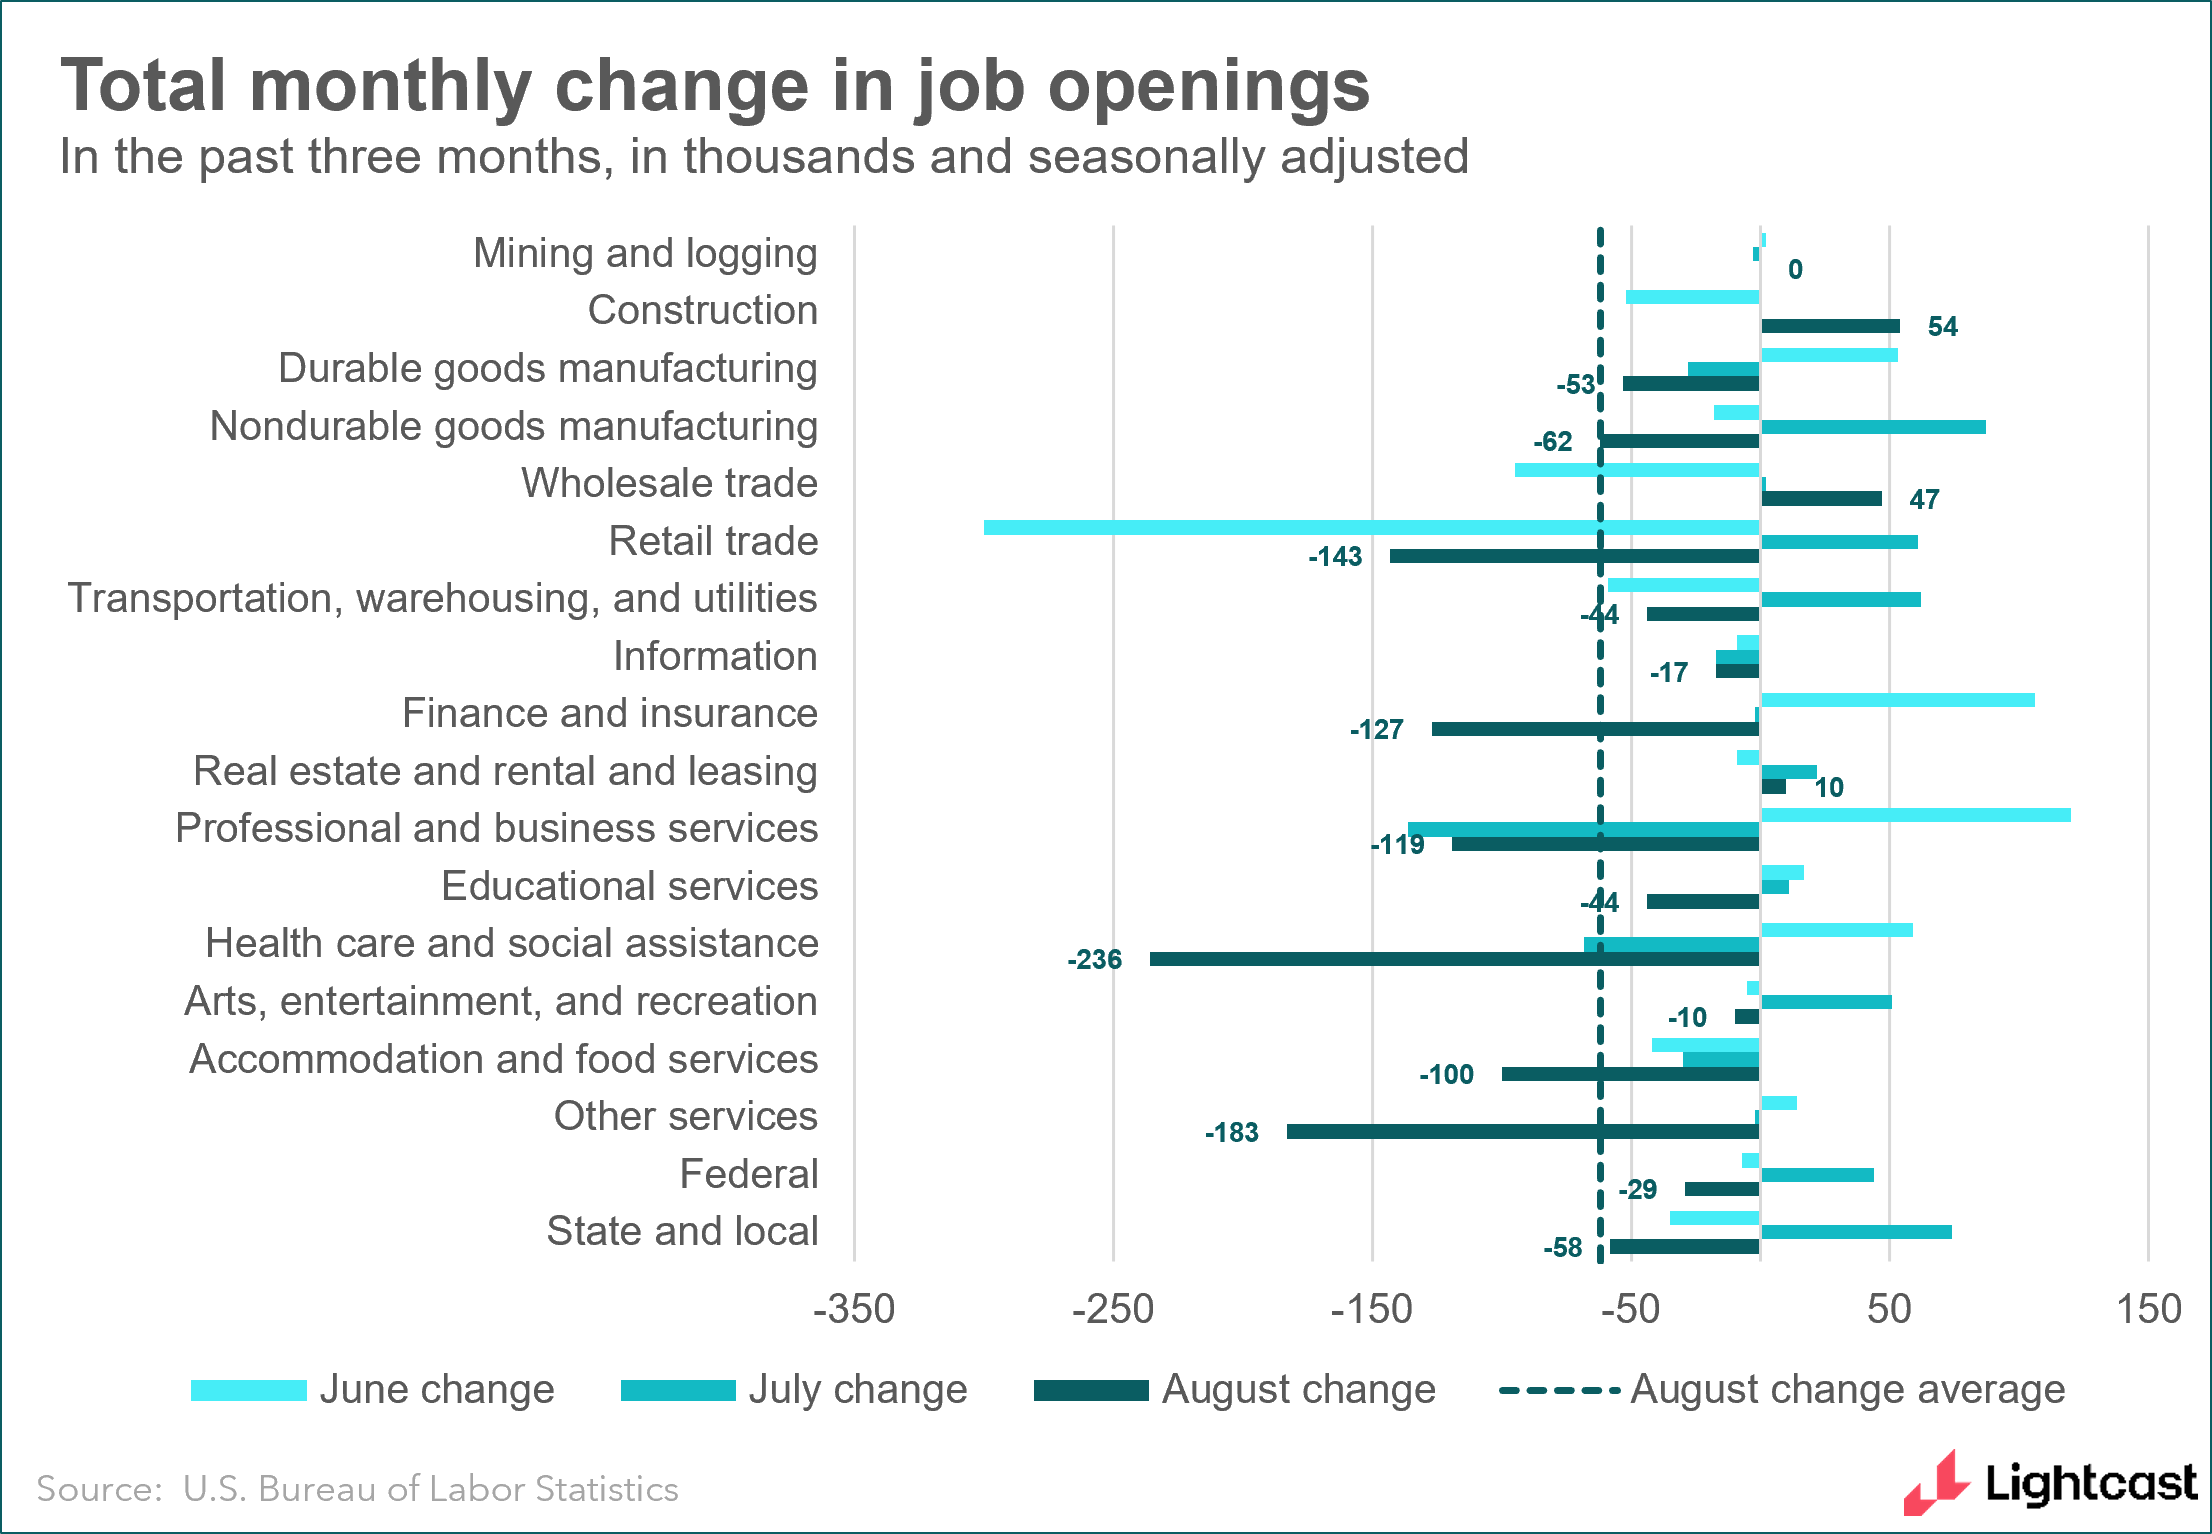 bar chart showing total monthly change in job openings